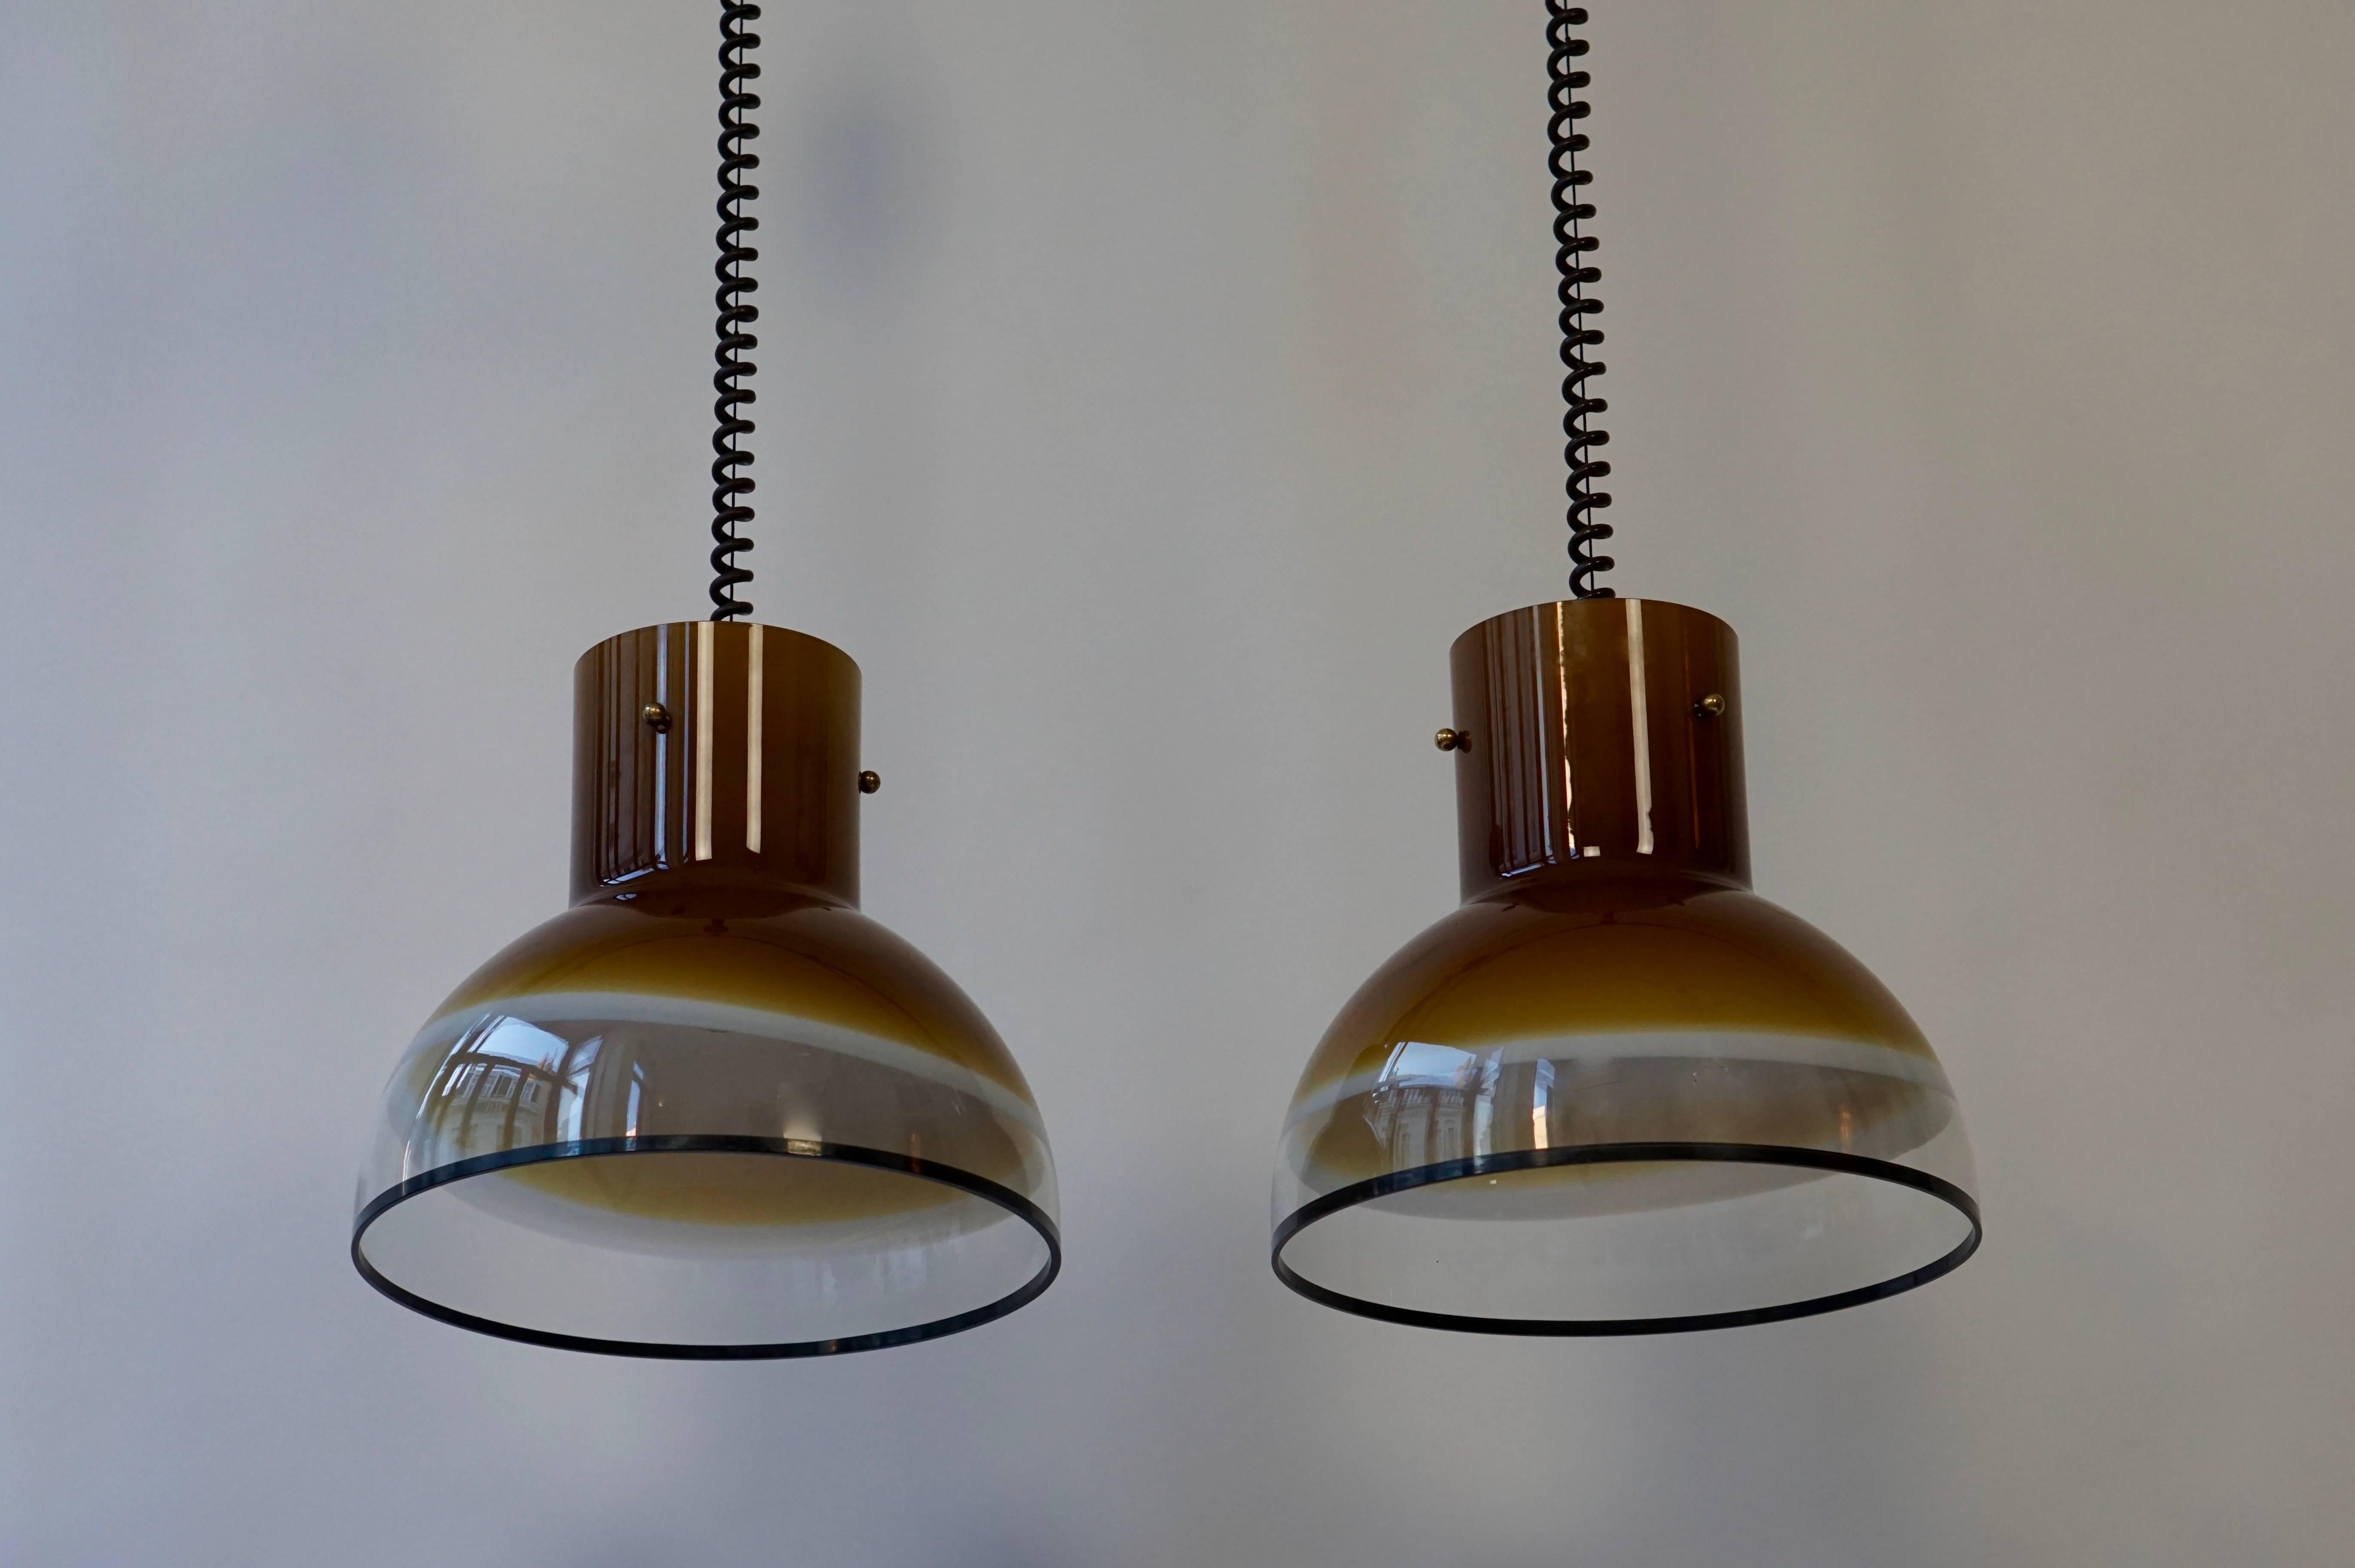 A set of two gorgeous Italian Murano ceiling lights from the seventies.
The height can be adjusted from 29.52 inches to 51.18 inches, the diameter of the glass is 13,77 inches.